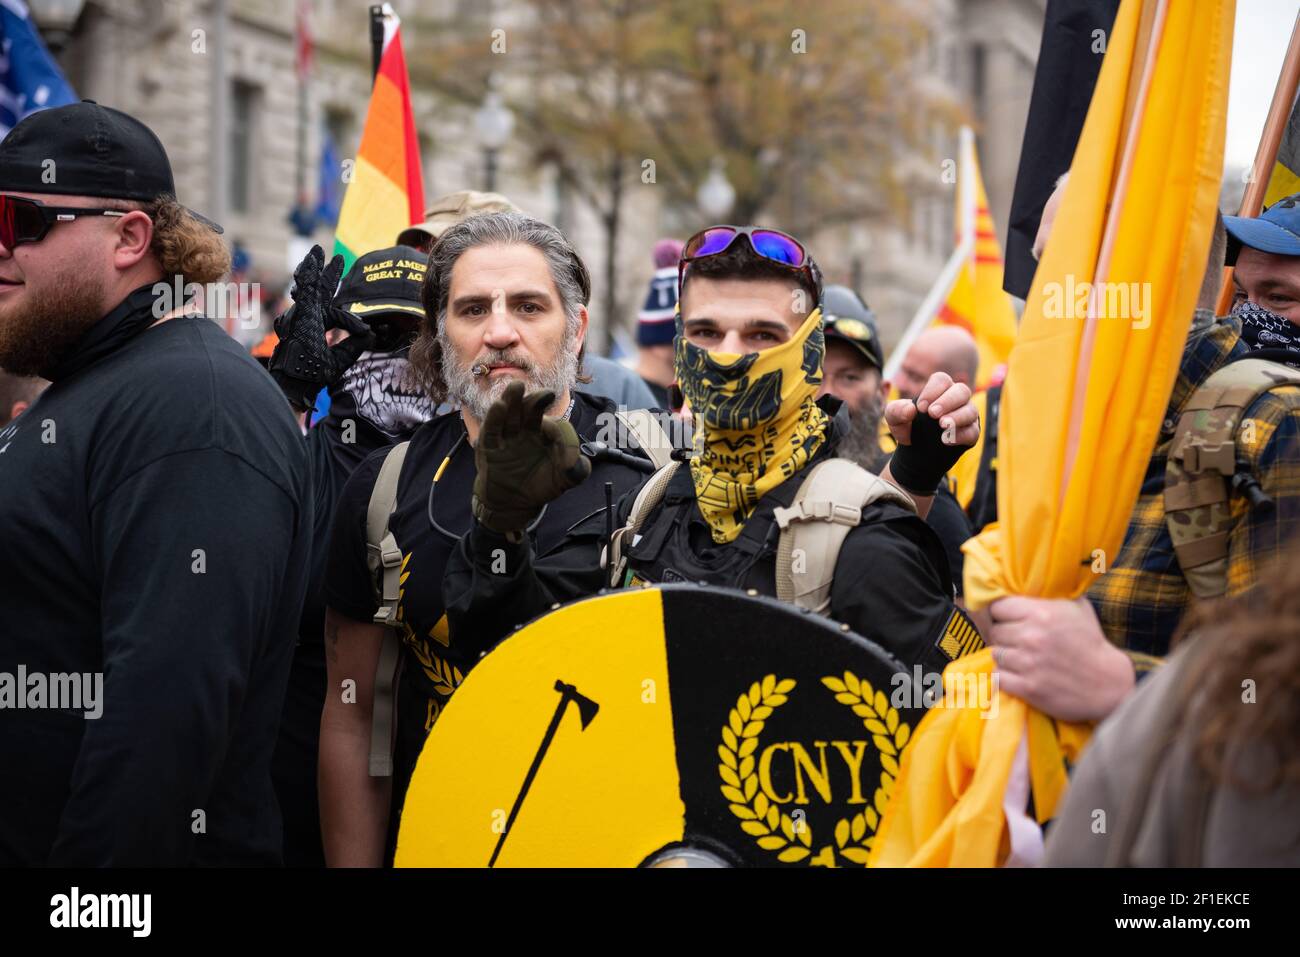 The far-right extremist group the Proud Boys take part in the 'Stop the Steal' rally on December 12, 2020 in Washington, DC. Stock Photo